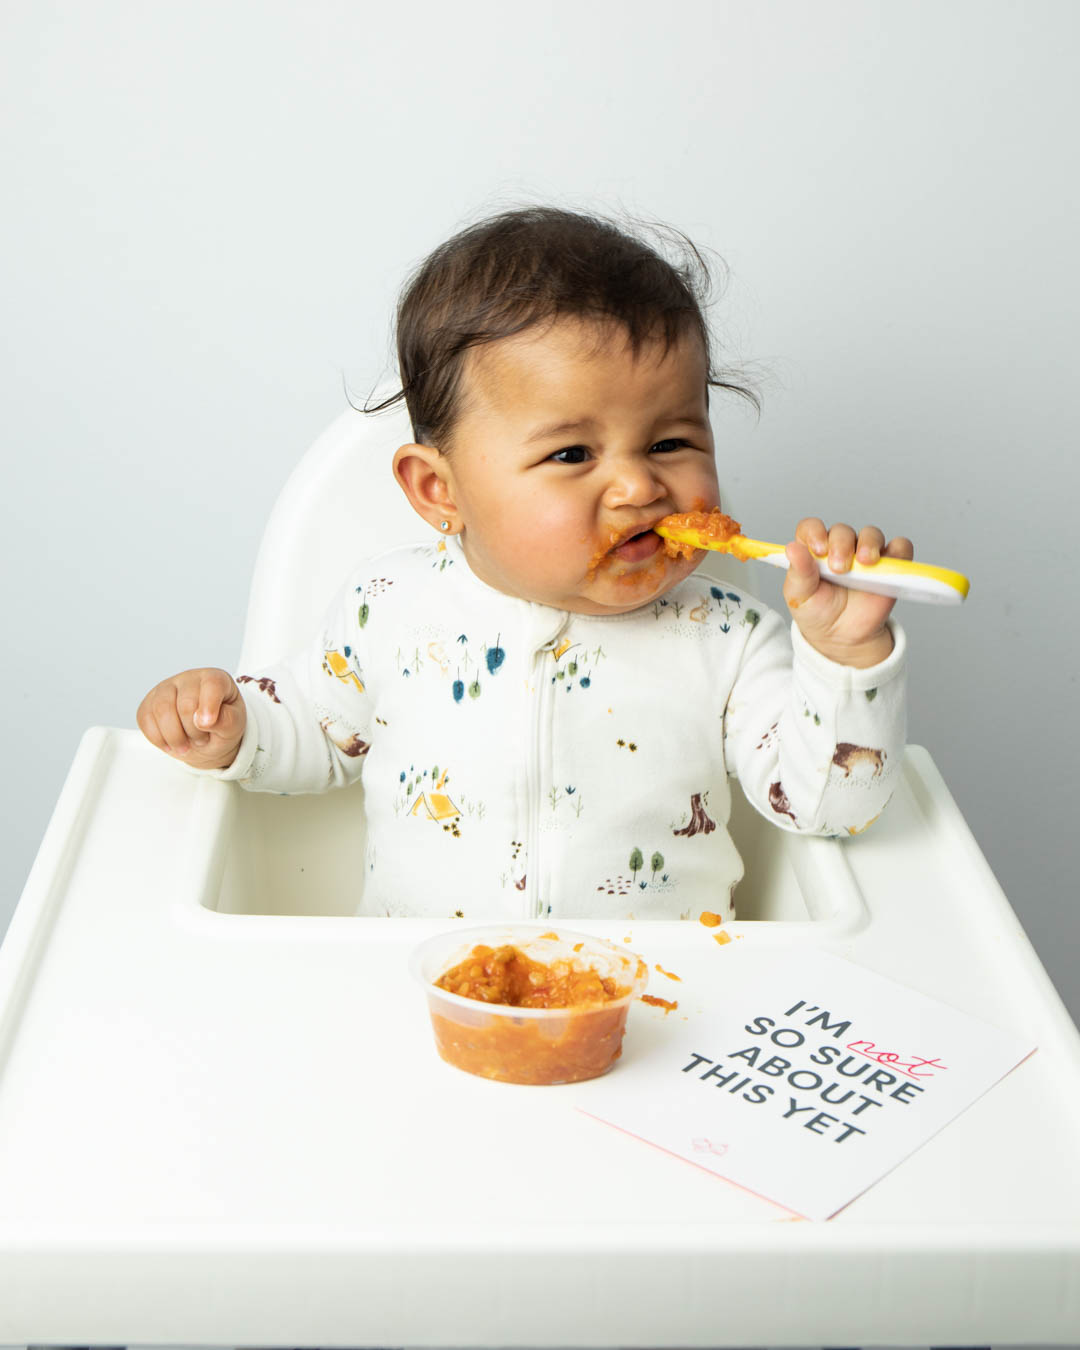 My Baby Has No Interest in Purées: Tips and Tricks for a Smooth Transition